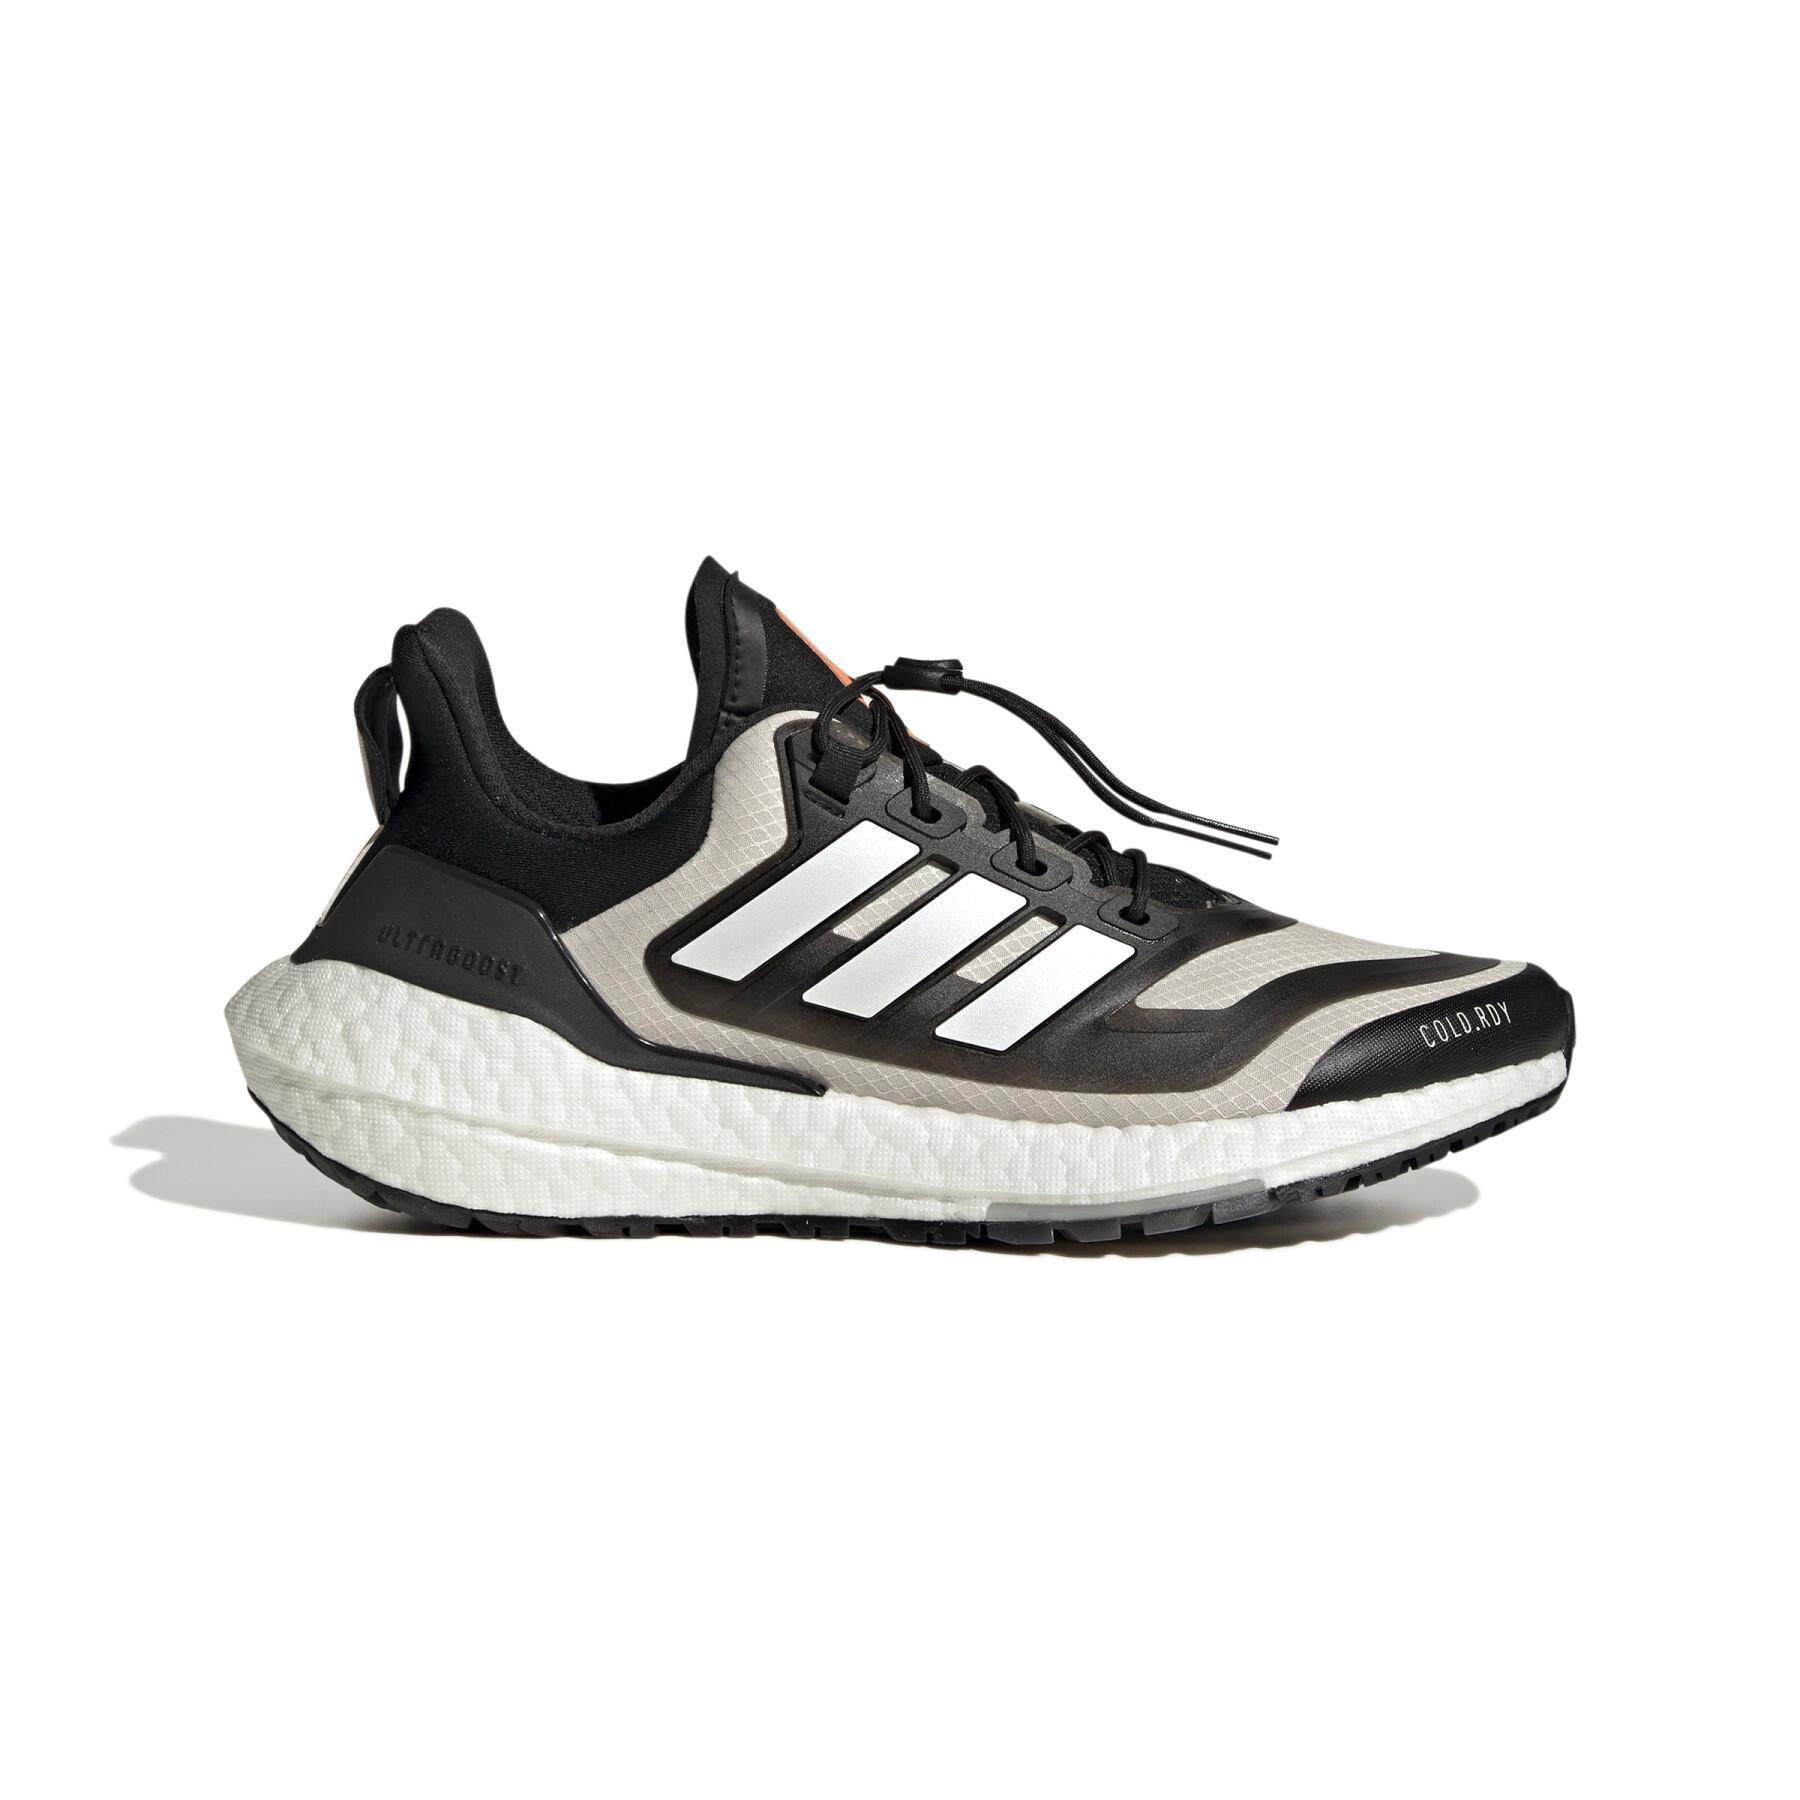 Women's running shoes adidas Ultraboost 22 Cold.dry 2.0